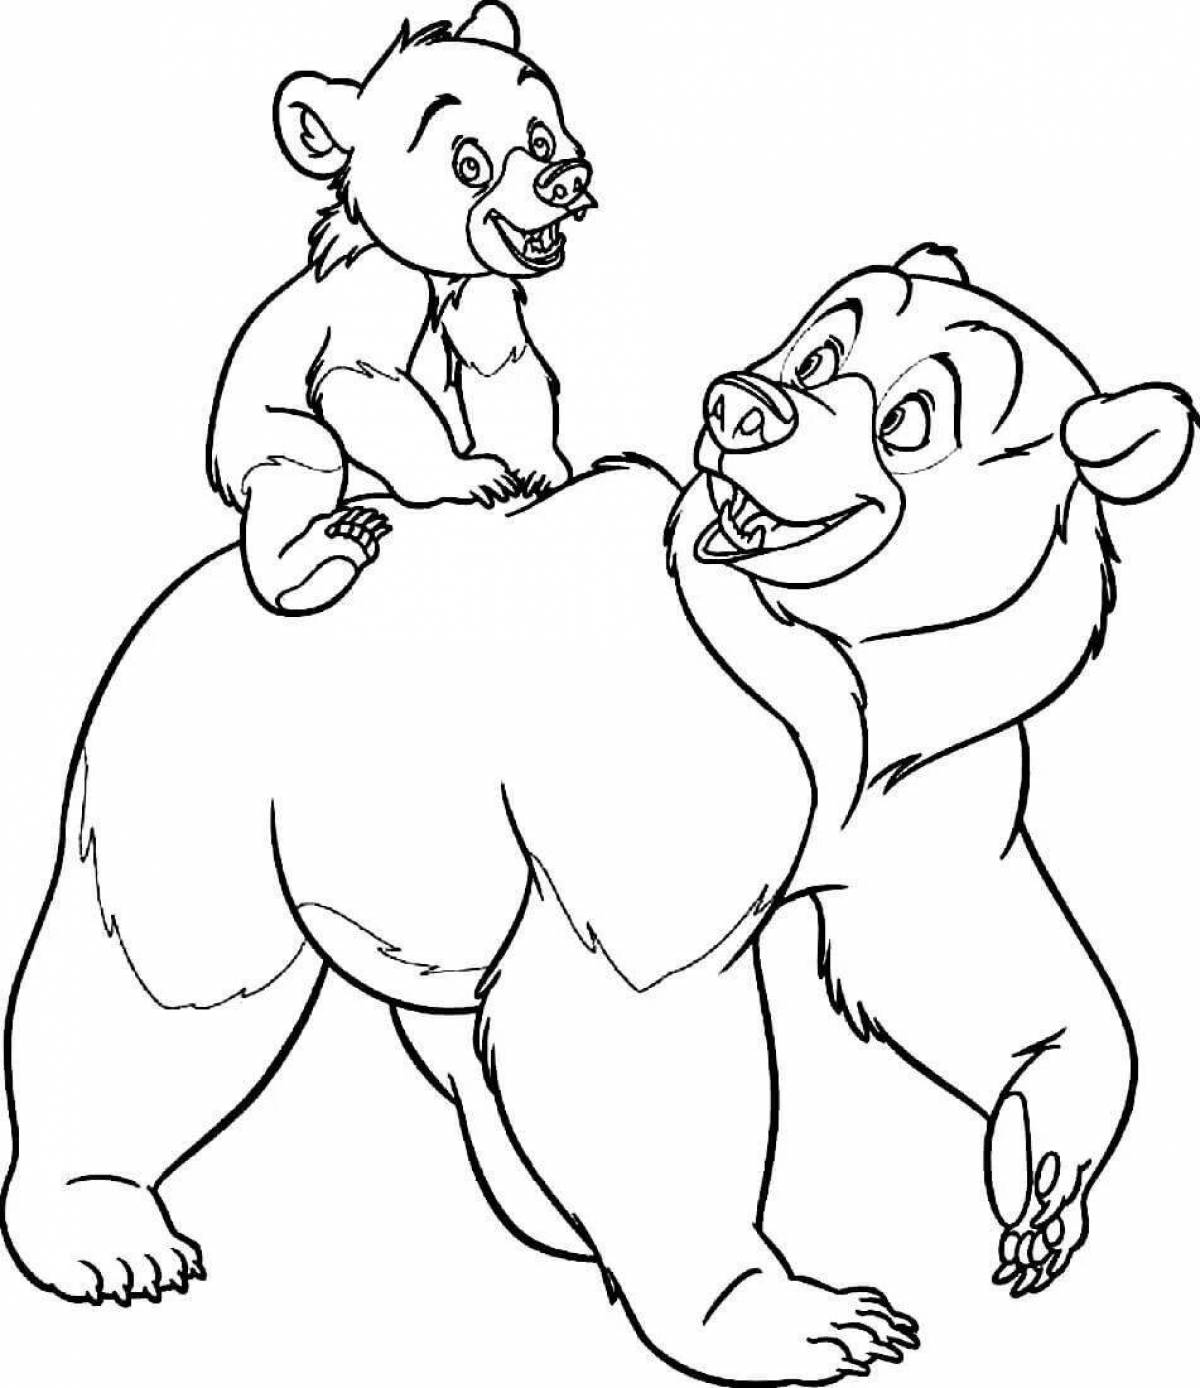 Coloring page adorable teddy bear with cubs